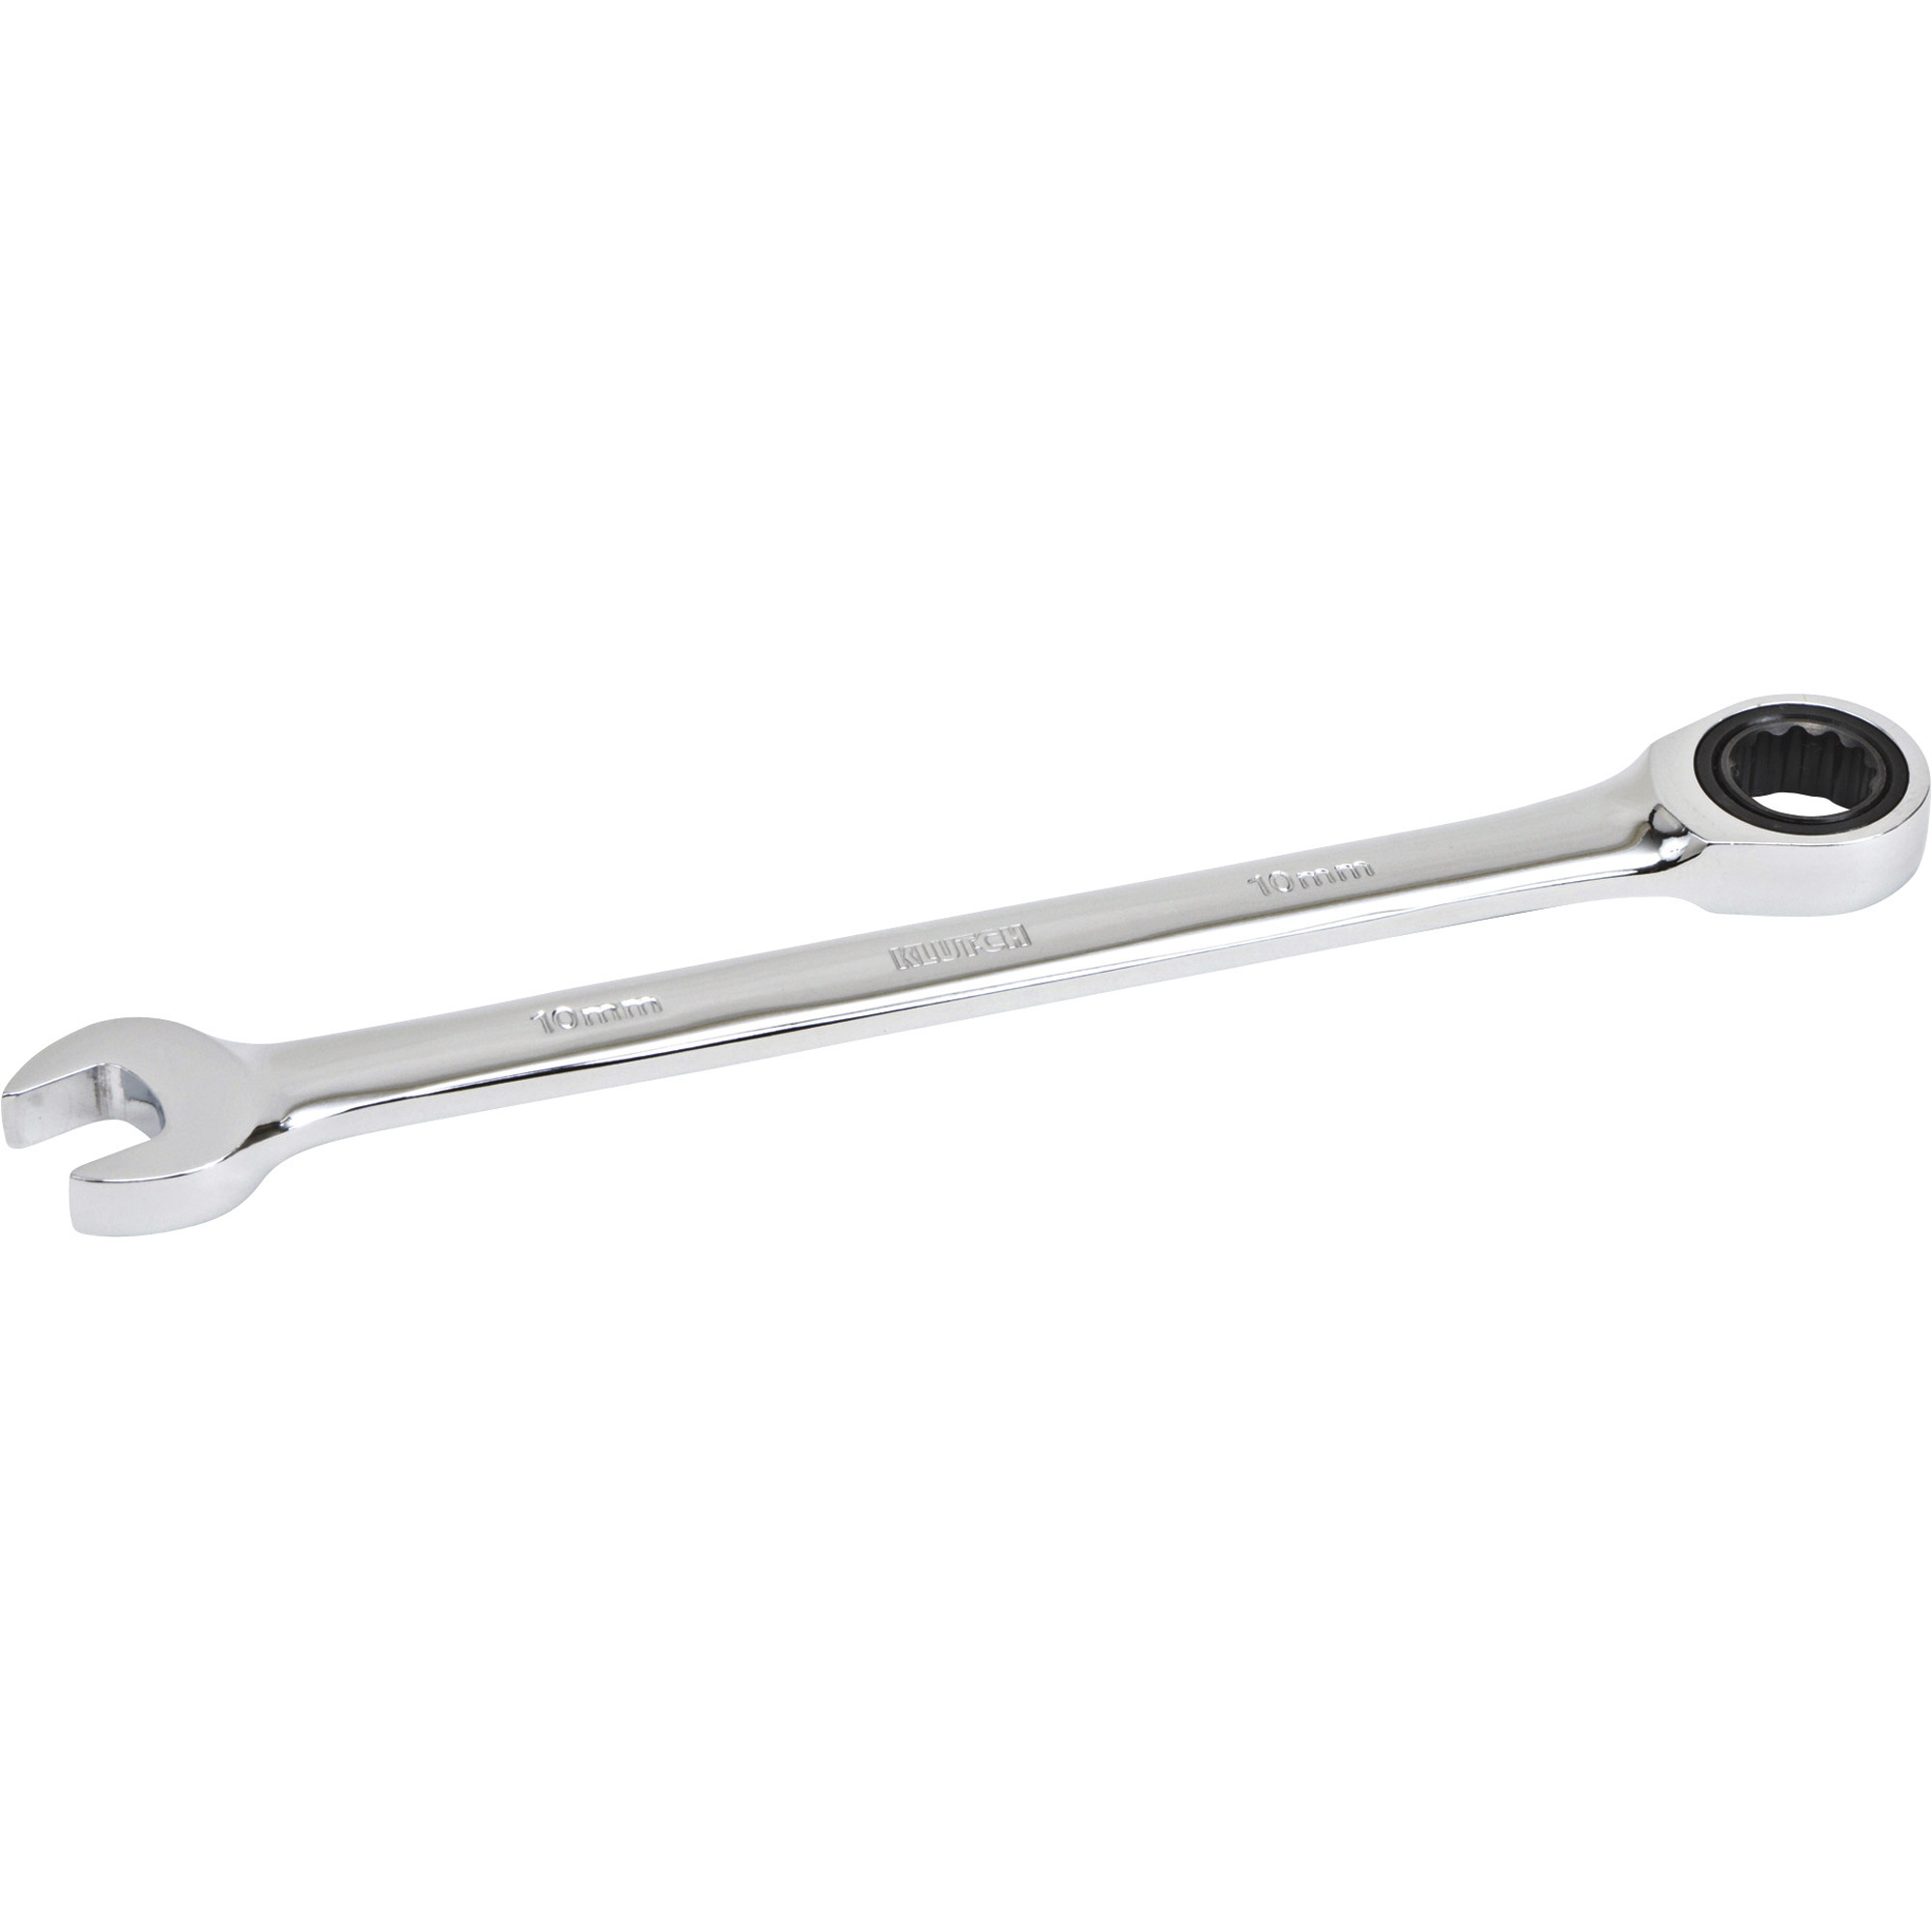 Klutch Ratcheting Wrench, Metric, 10mm